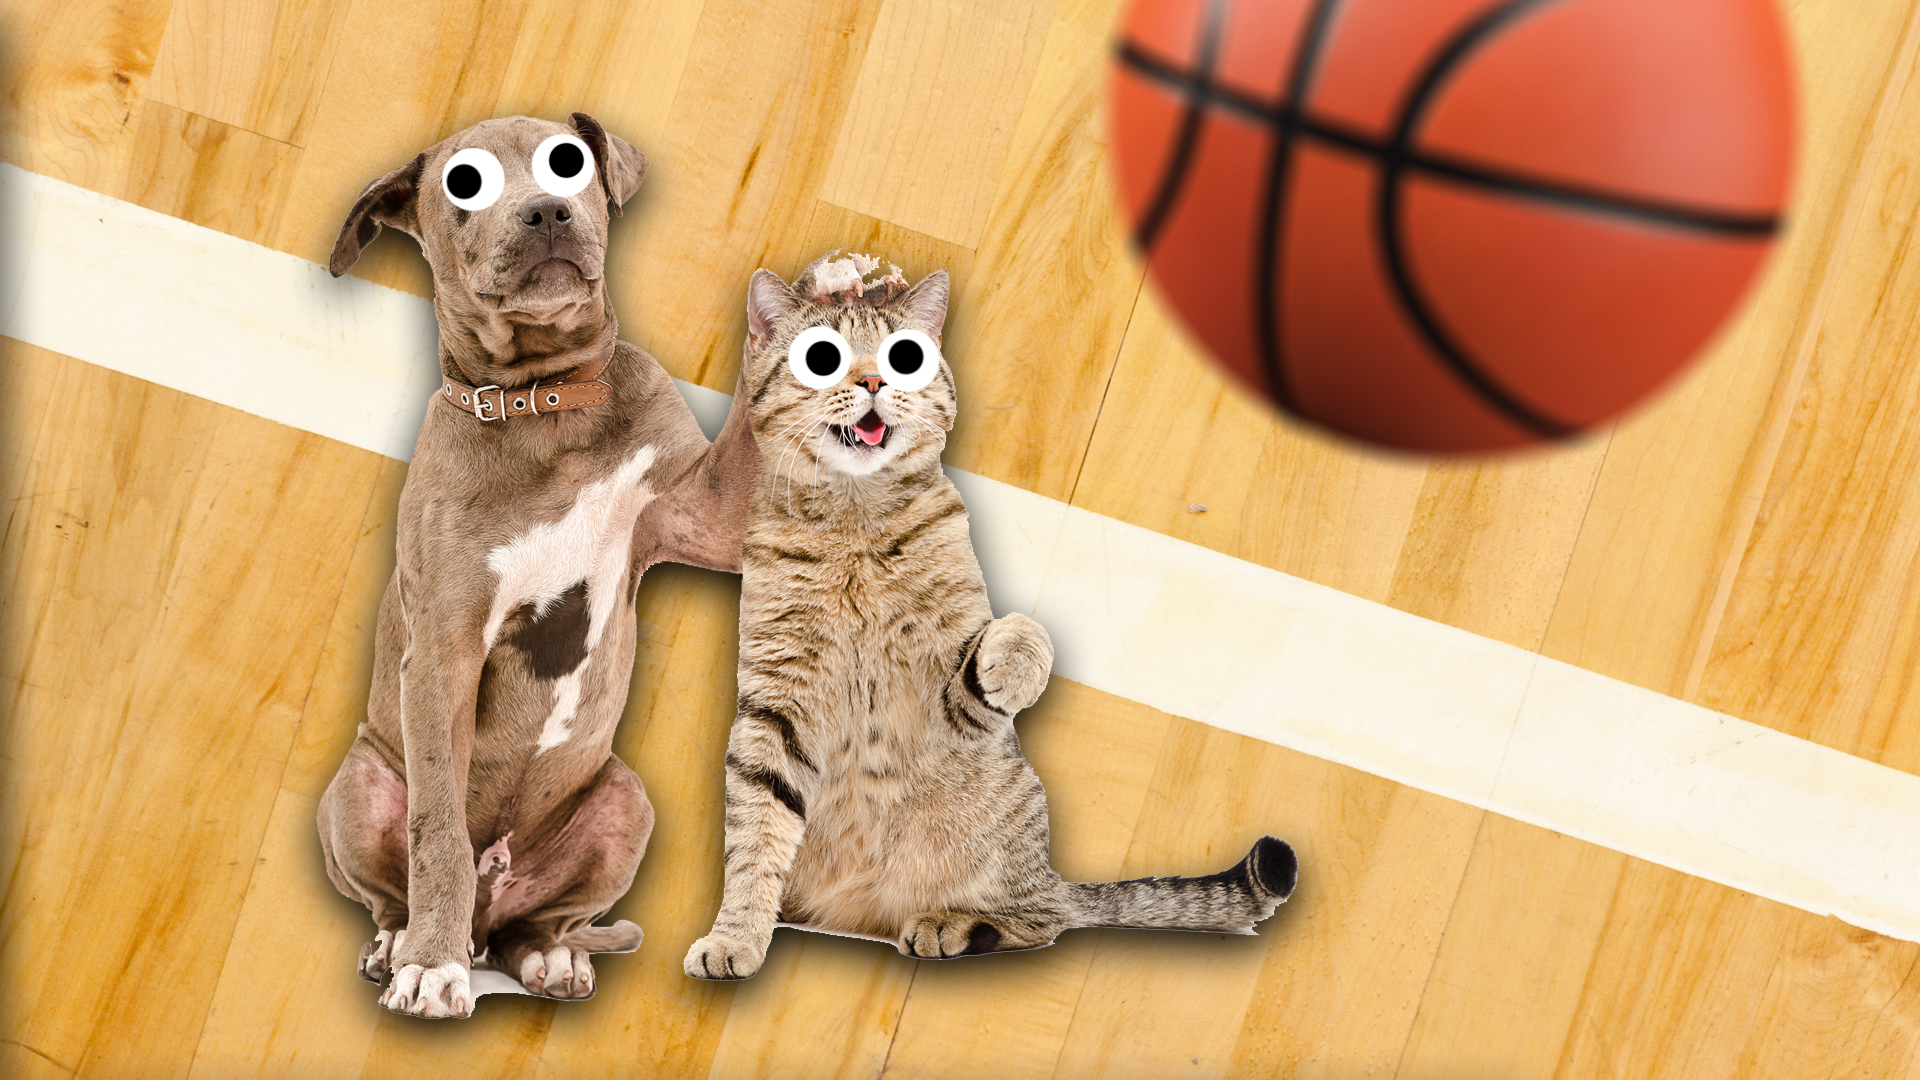 A cat and dog play basketball